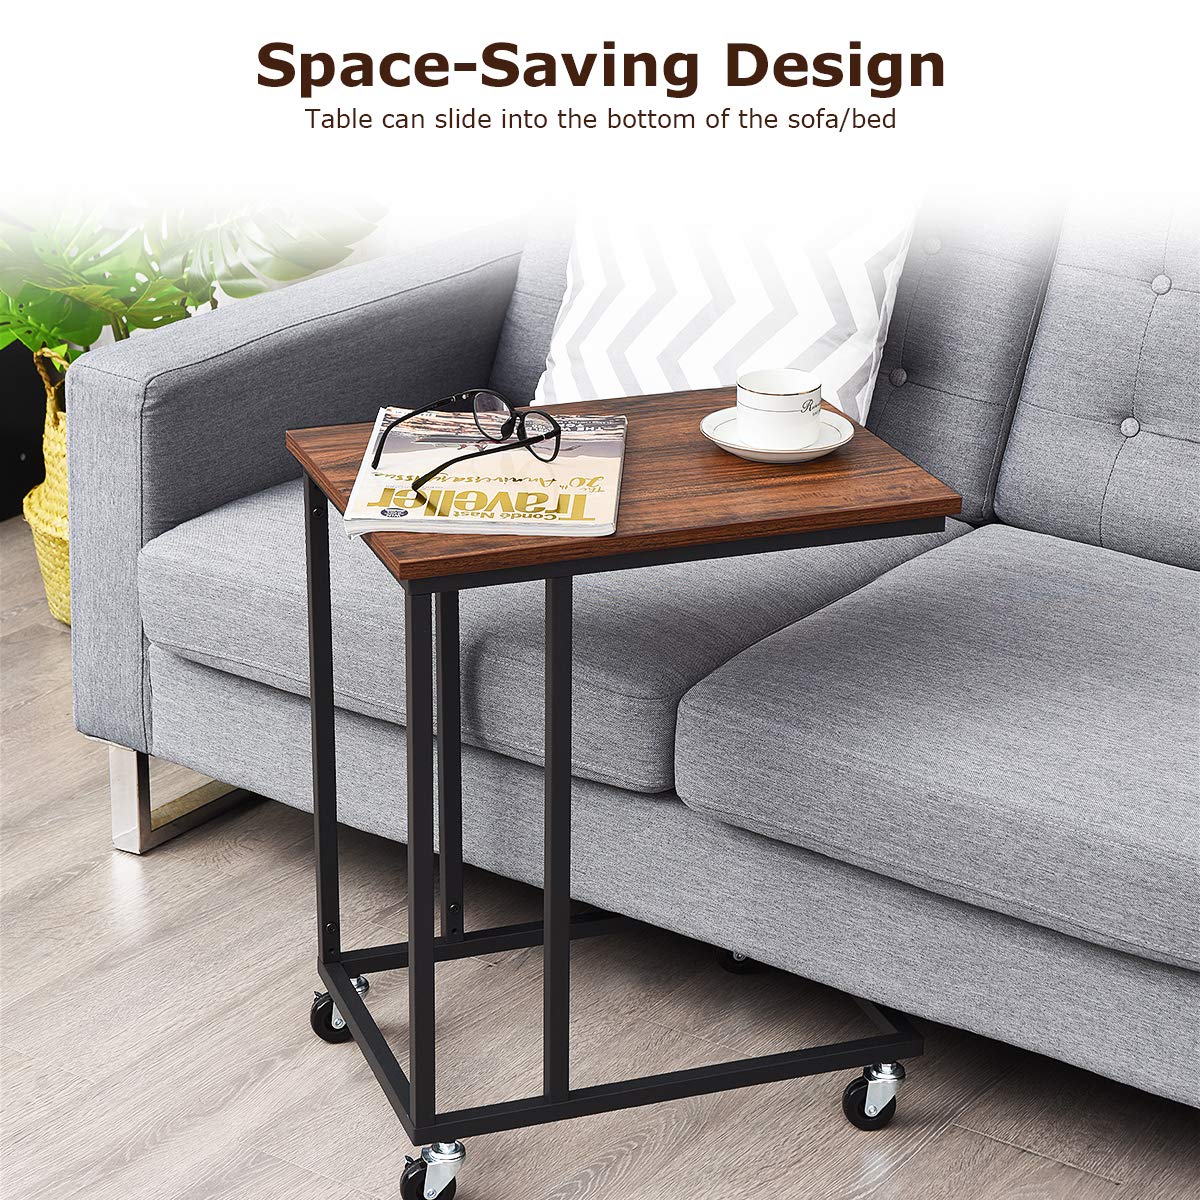 Giantex Industrial Side Table, Mobile Sofa End Table Vintage Accent C-Shaped Table